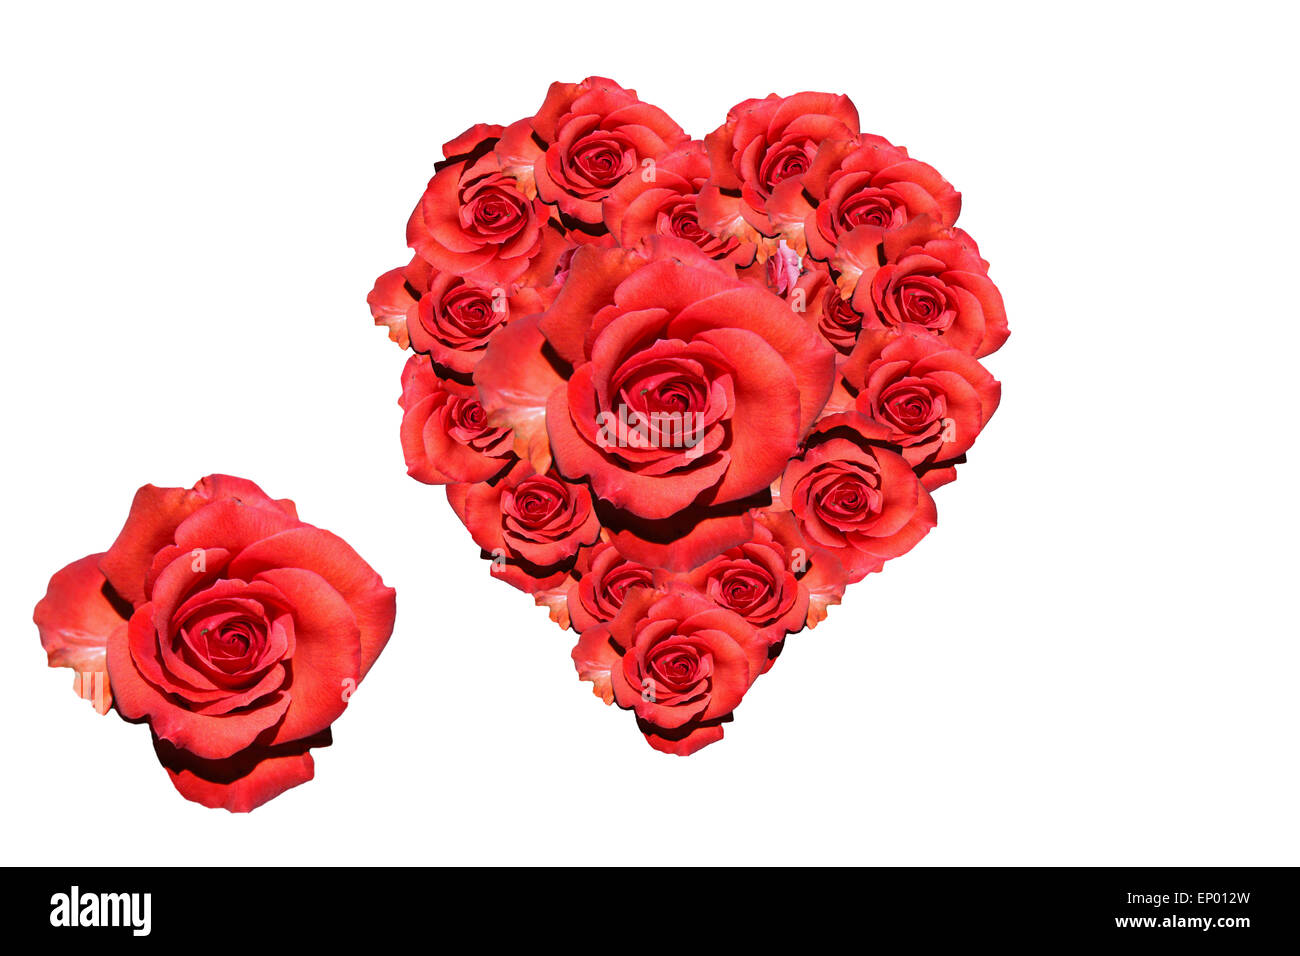 Herz: Rote Rosen - Symbolbild Liebe/ Valentinstag/ heart: red rose - symbolic image for love, afection and Valentines Day. Stock Photo